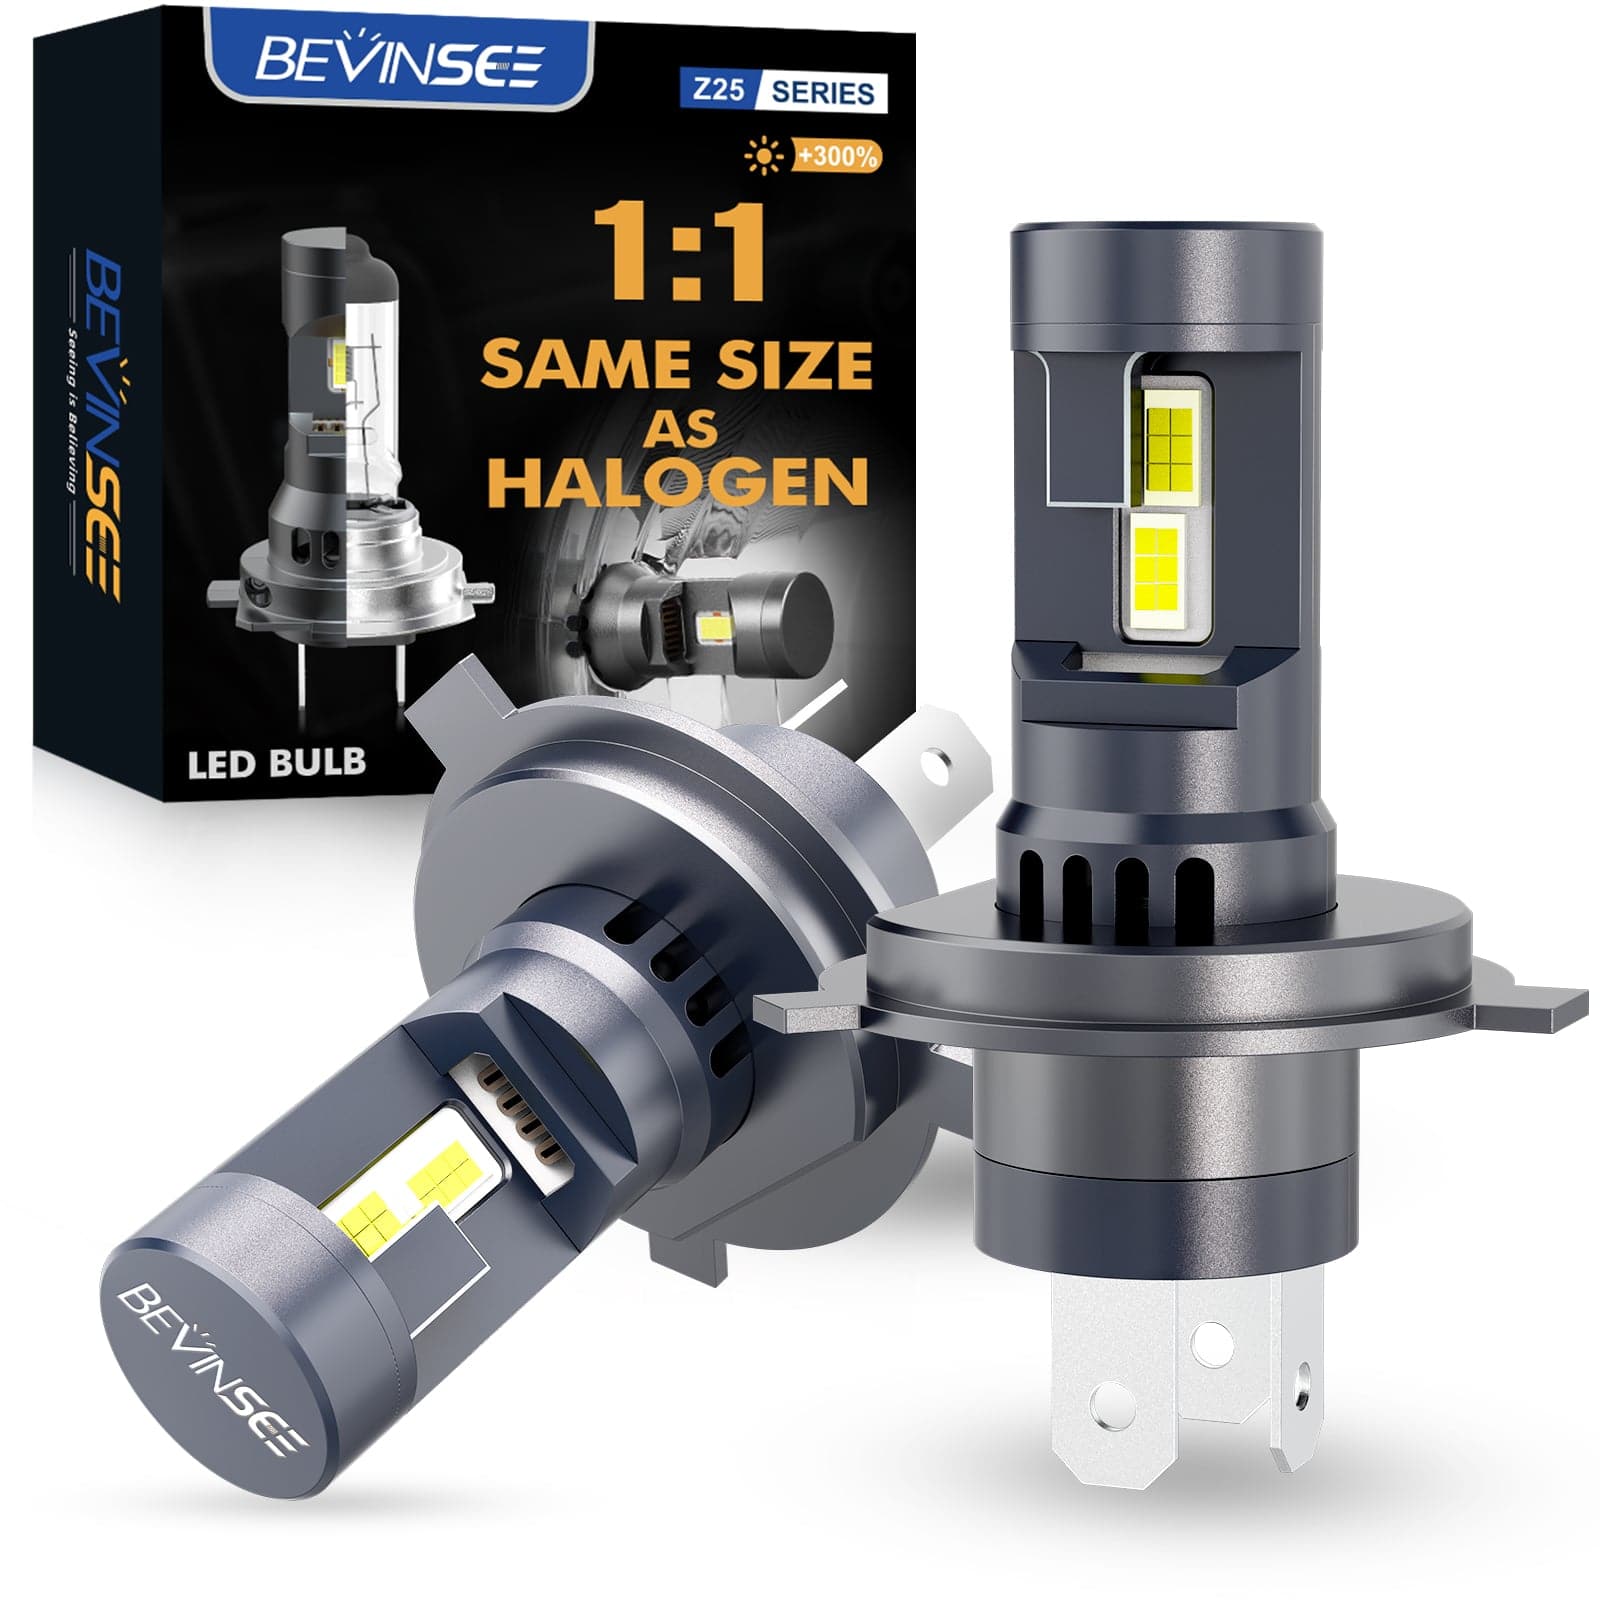 Bevinsee 2022 Best Z25 H4 Led Headlight 1:1 As Halogen Lamps